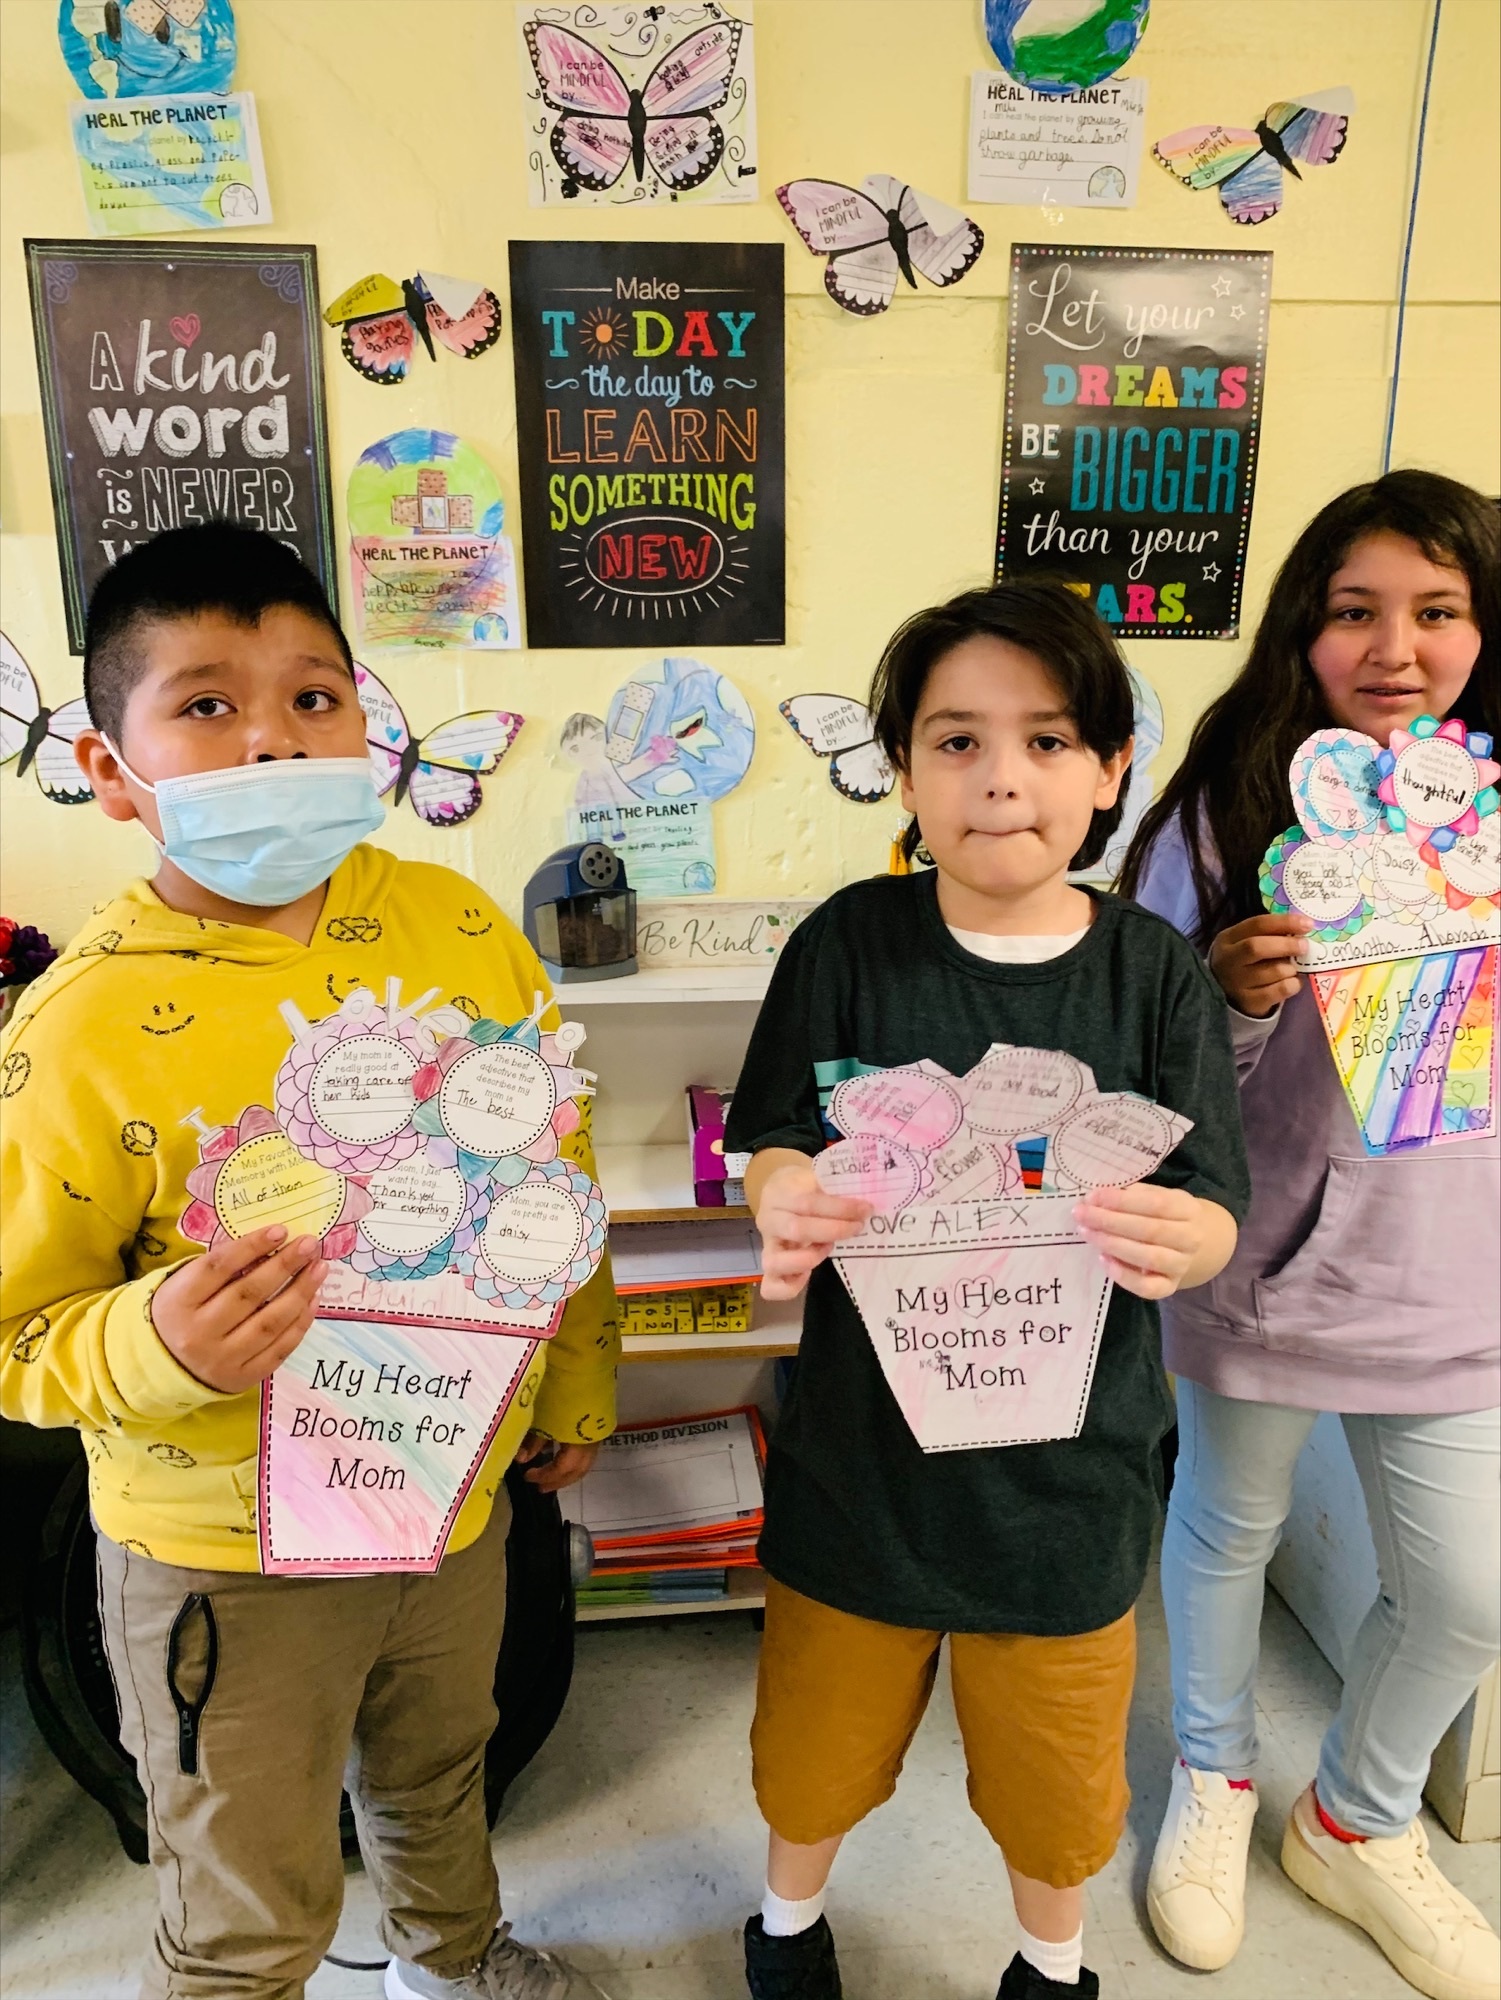 Hampton Bays Elementary School fourth grade students in Krista Savino’s class used their writing skills to carefully craft special Mother’s Day gifts. They each decorated a colorful flower and adorned it with writings about their favorite memories of their mom. With their gifts, from left,  left,  Eguin Puin Faraz, Alex Sandoval and Samantha Alvarado. COURTESY HAMPTON BAYS SCHOOL DISTRICT